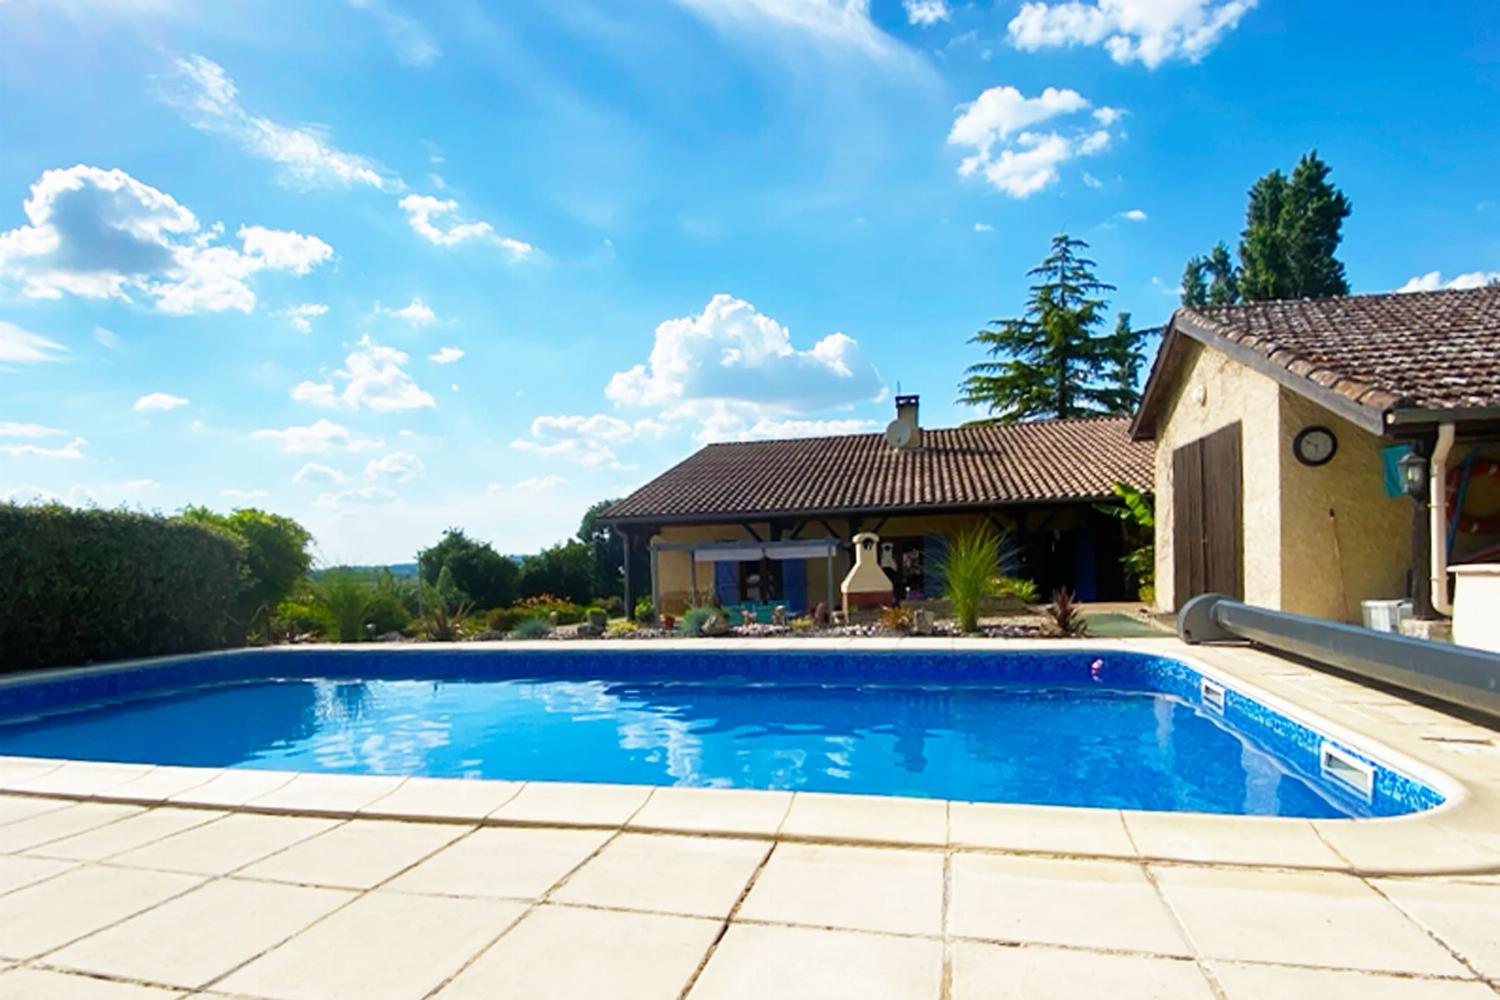 Holiday accommodation in South West France with private pool